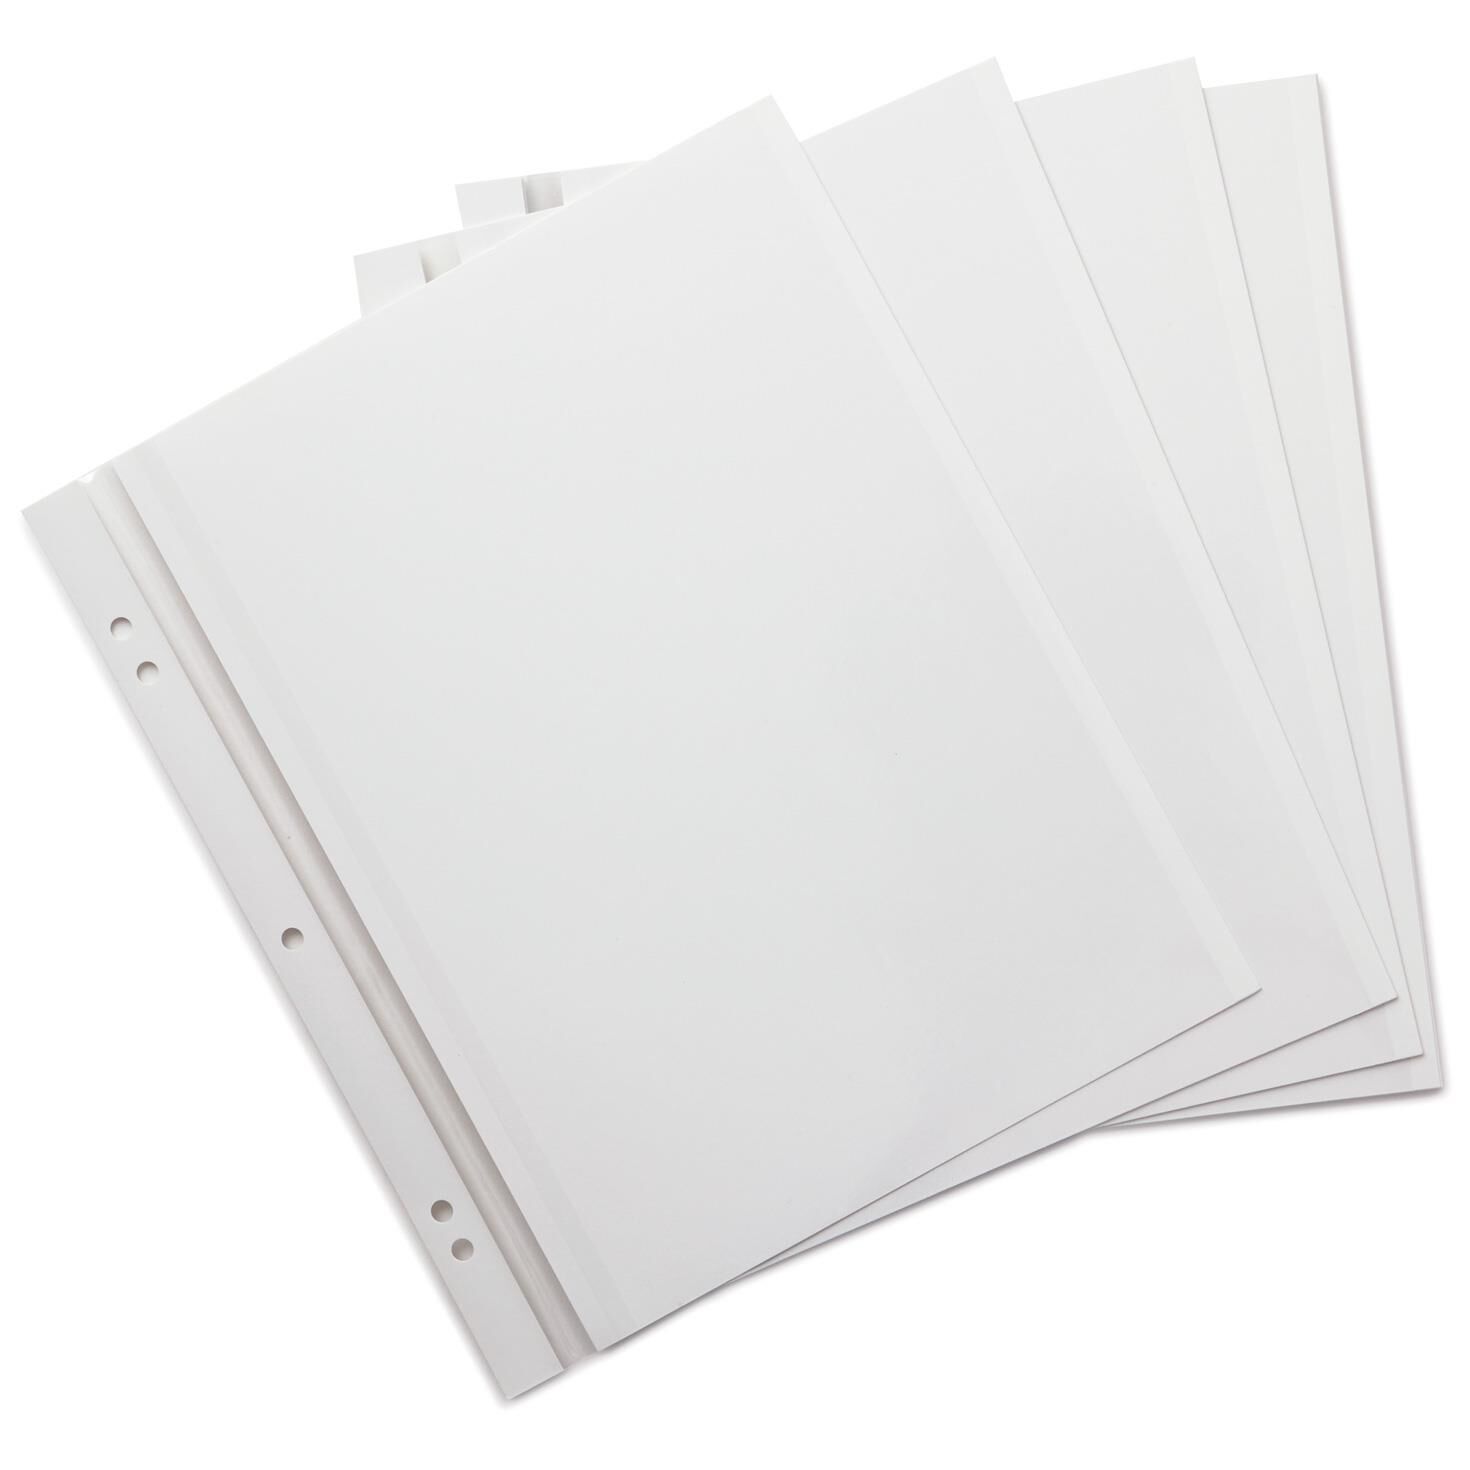  NESCL Photo Album Self Adhesive 80 Sticky Pages